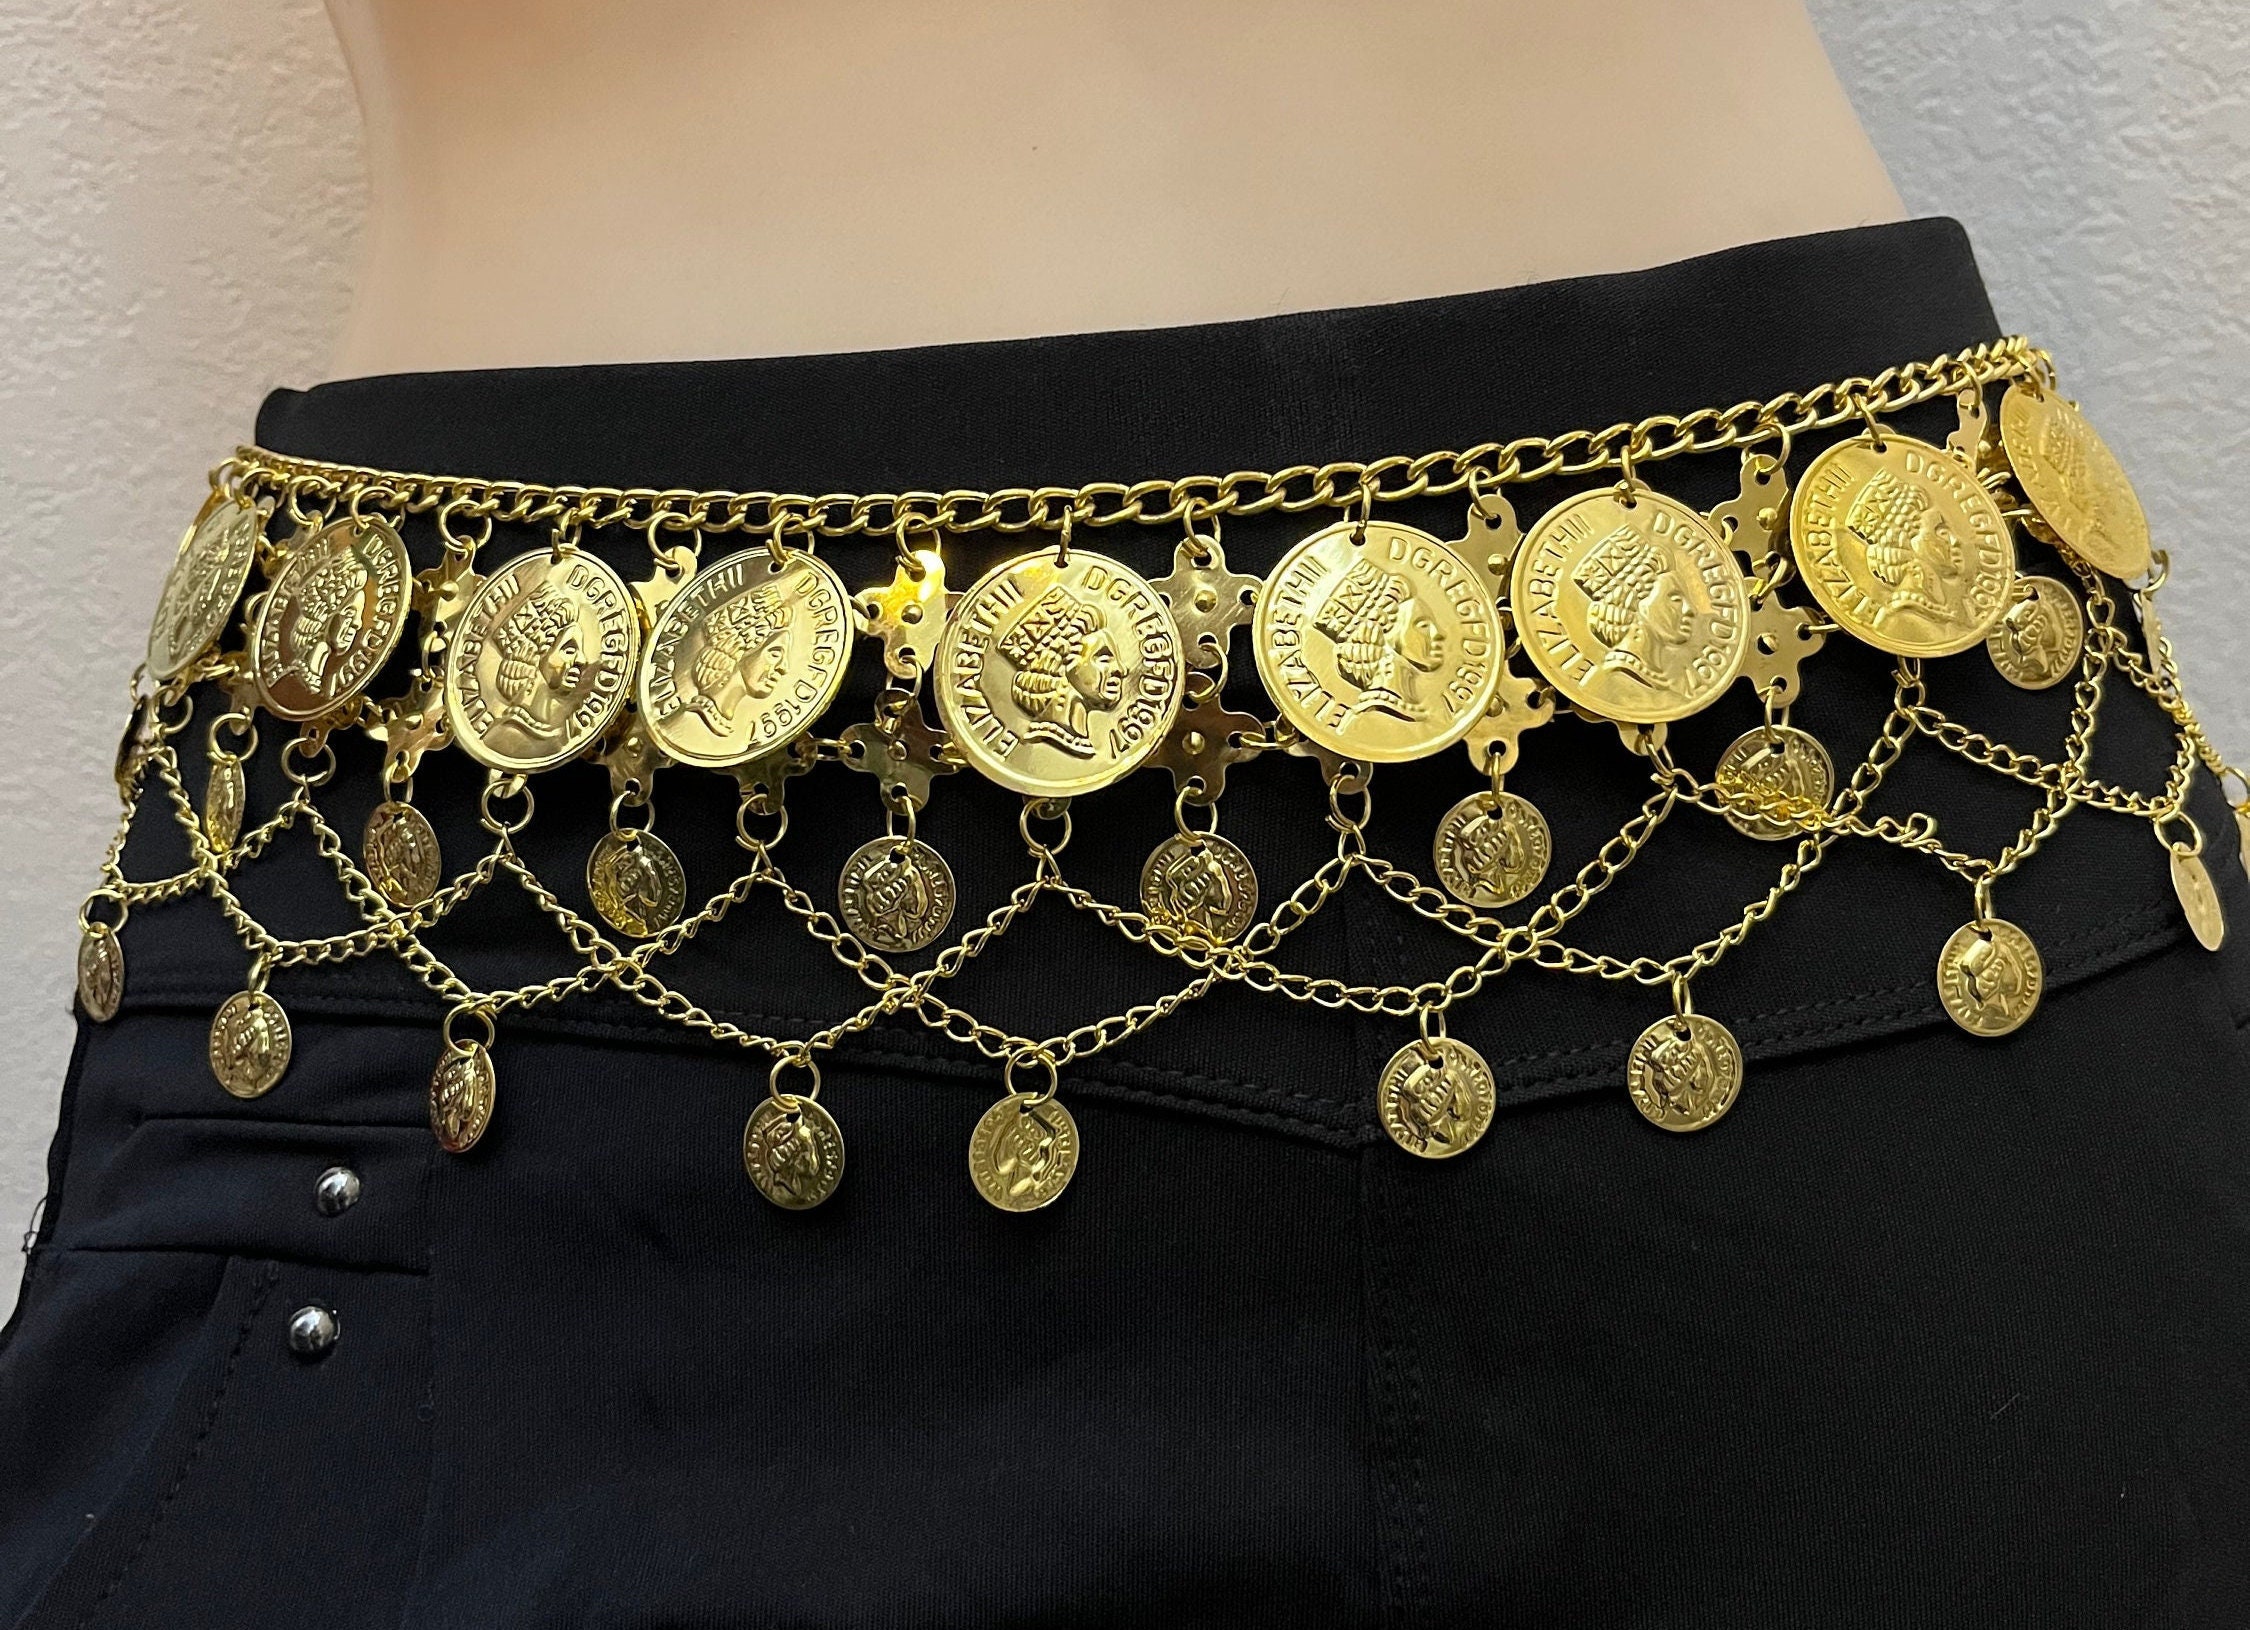 Gold Tribal Coin Belt Belly Dance Coin Belt With Coin Fringe Queen  Elizabeth II Coins -  Canada